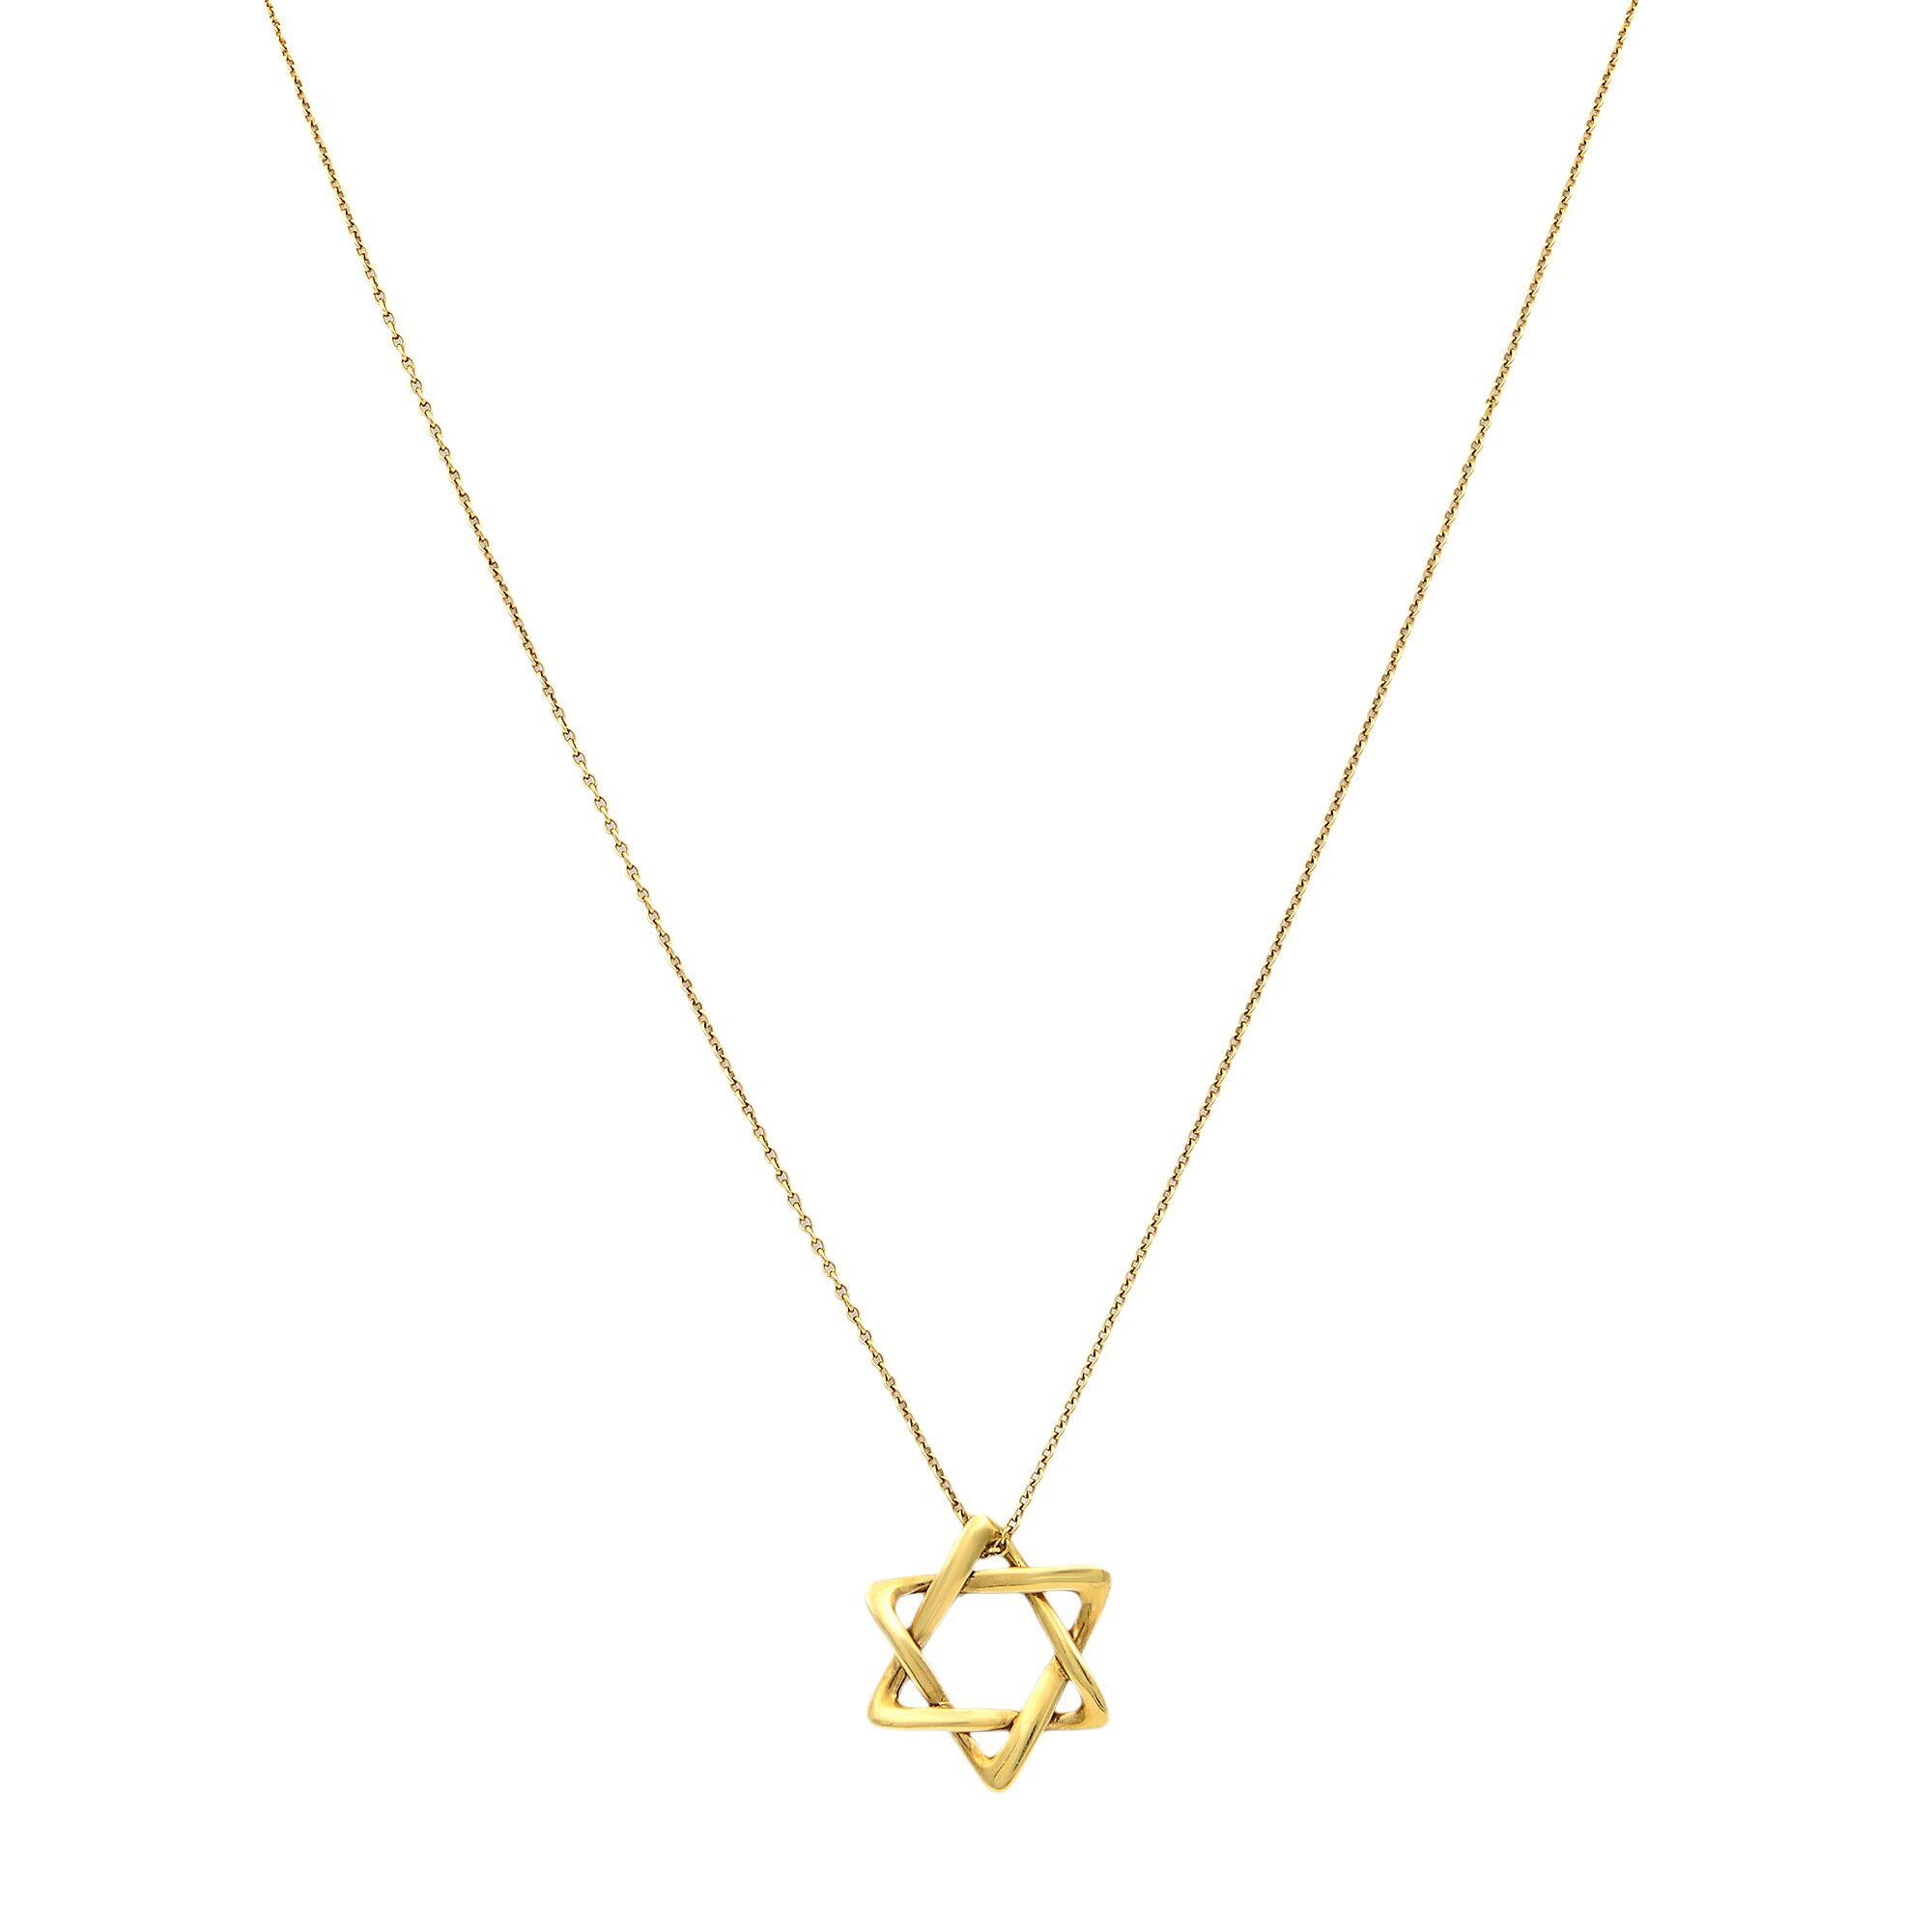 Tiffany & Co Star of David pendant in 18k gold, 12 mm wide. On a 16 inch chain. Original designs copyrighted by Elsa Peretti.
Excellent pre-owned condition. Box and papers are not included. 